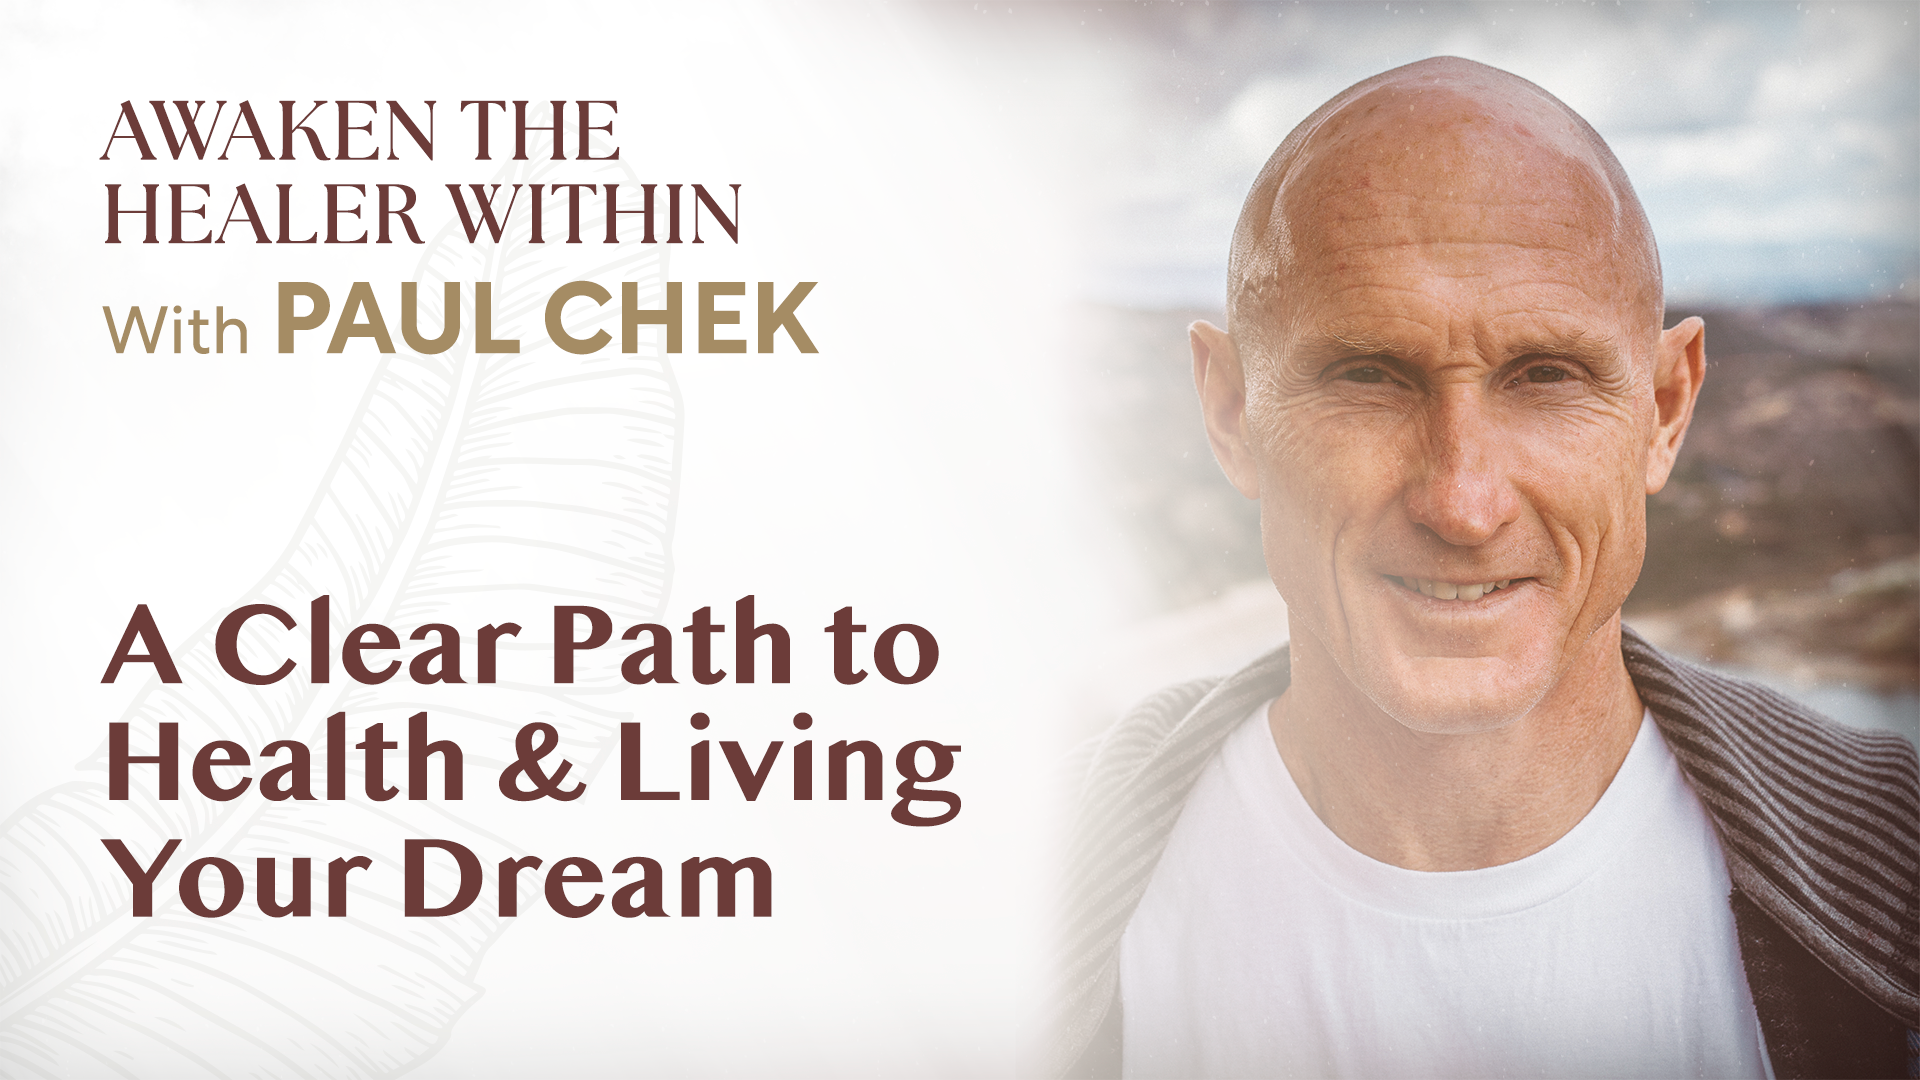 A Clear Path to Health & Living Your Dream